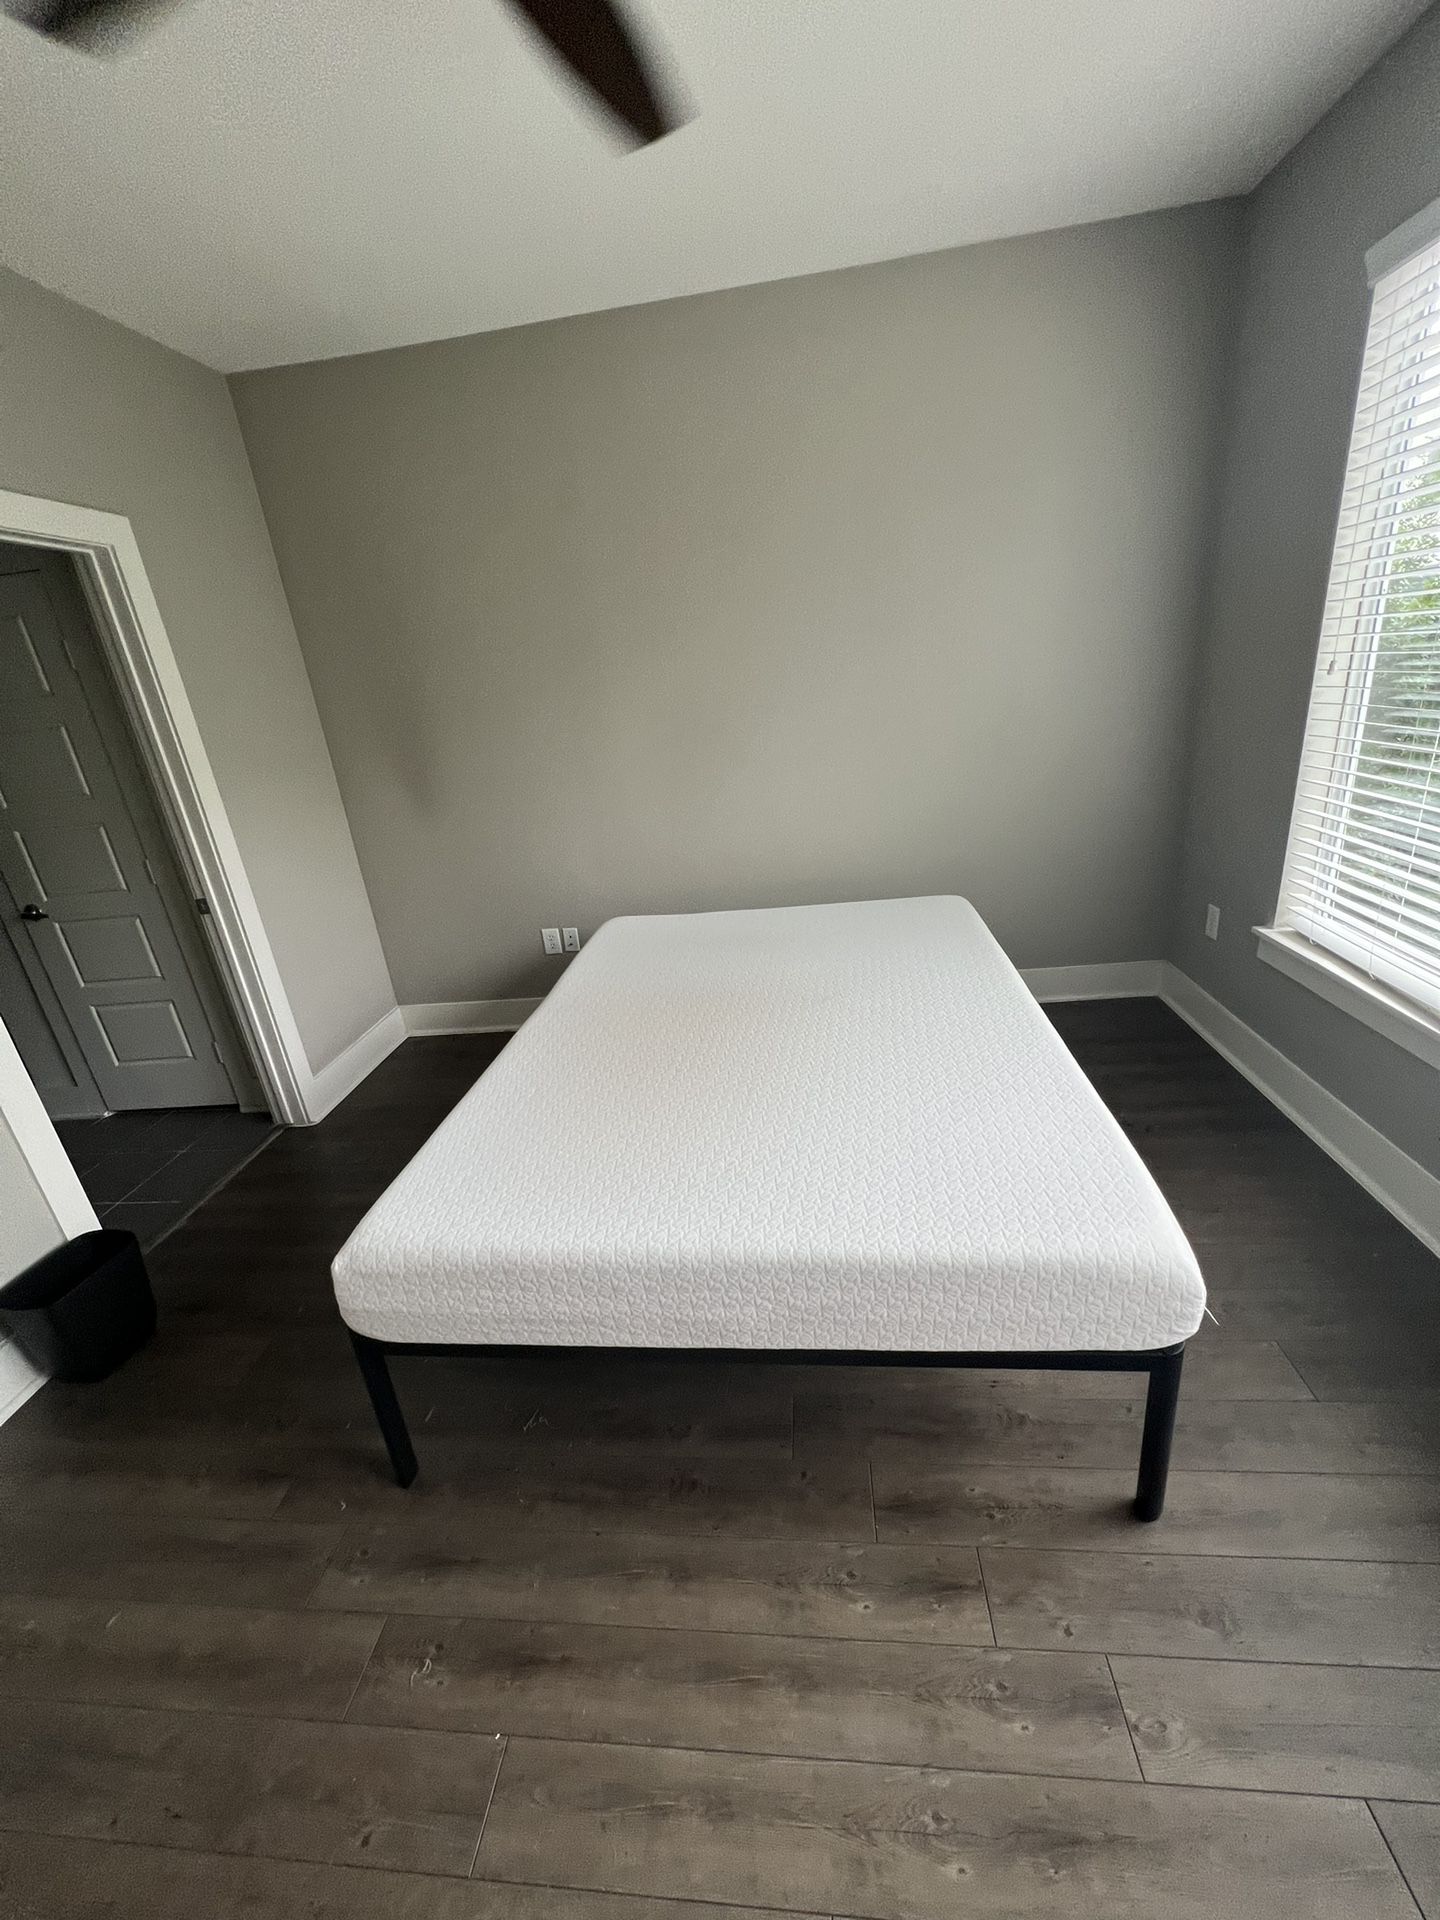 Queen Mattress And Frame For Sale